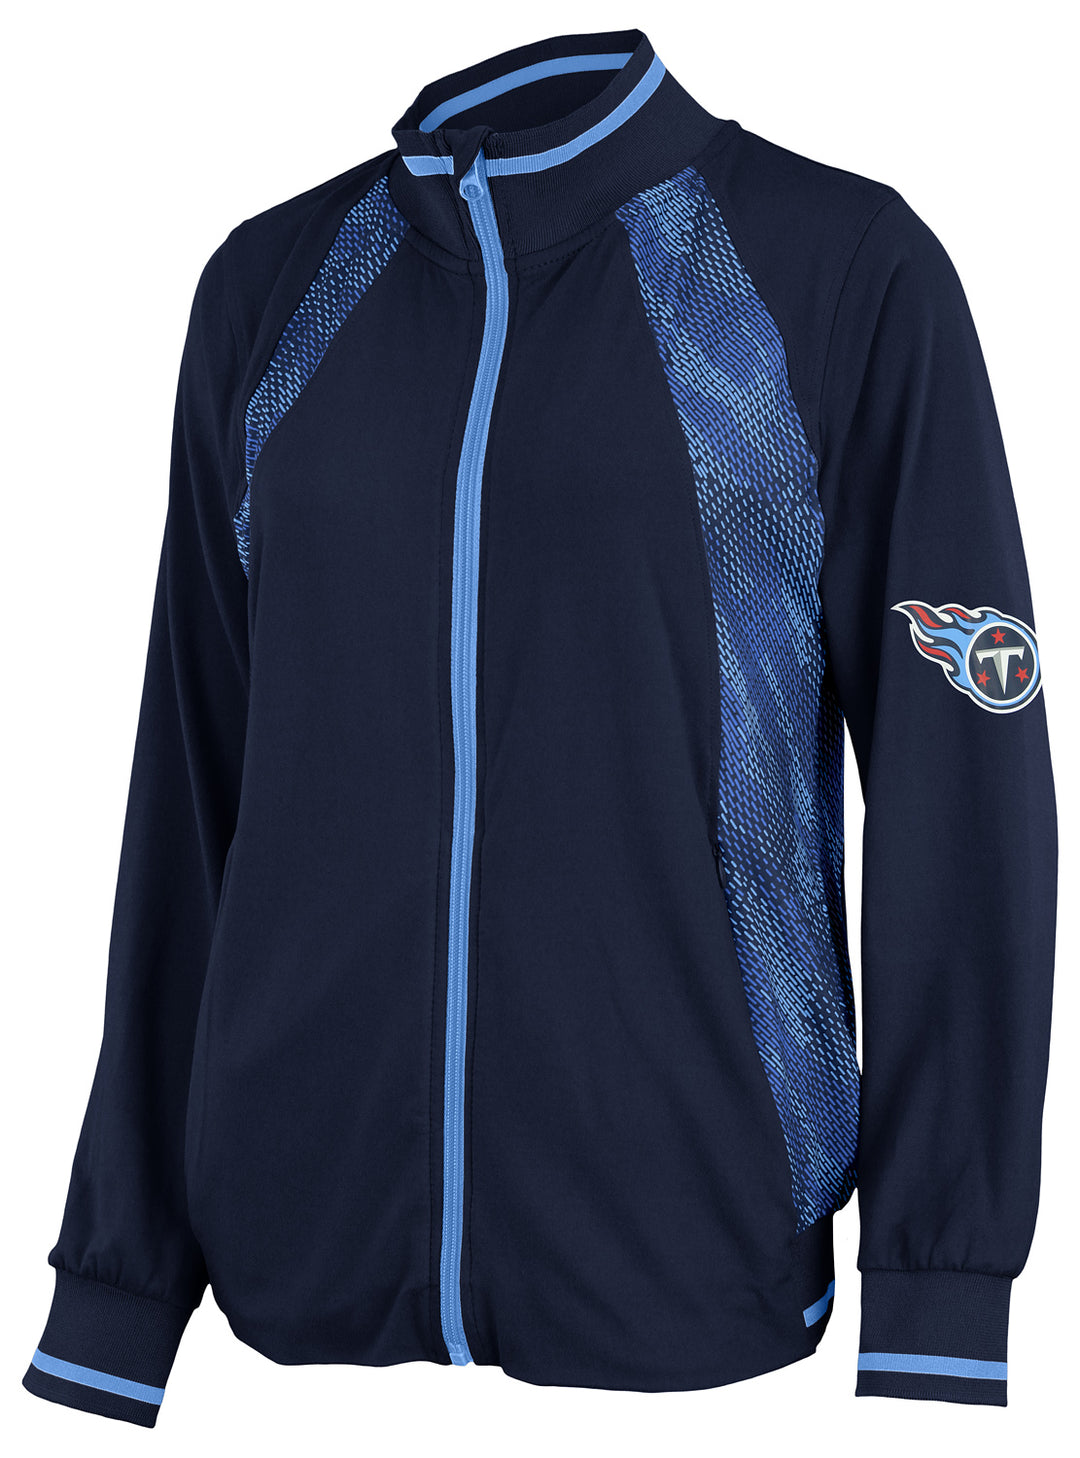 Zubaz NFL Women's Tennessee Titans Elevated Full Zip Viper Accent Jacket